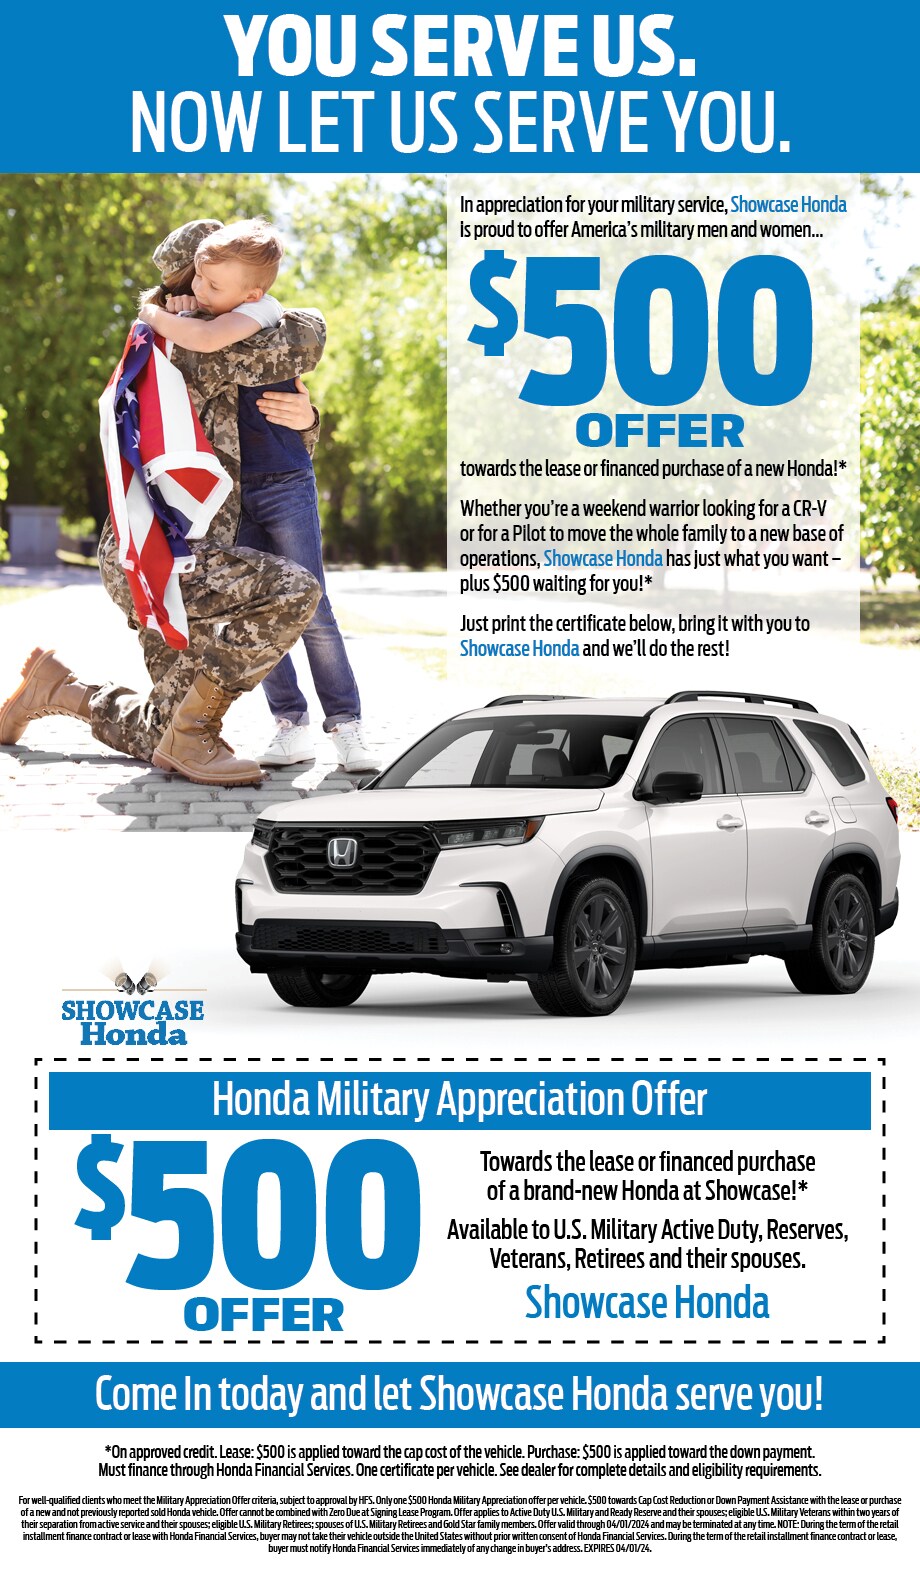 Honda Military Appreciation Offer $500.00. In appreciation for your military service, Honda is offering select U.S. Military individuals and their spouses $500toward any 2022 or newer model year Honda automobile when you finance or lease through Honda Financial Services® (HFS). See offer details for customer and vehicle eligibility toward capcost/down payment assistance. Available Dates April 01, 2022 - April 03, 2024 For well-qualified clients who meet the Military Appreciation Offer criteria, subject to approval by HFS. Only one $500Honda Military Appreciation offer per vehicle. $500 towards Cap Cost Reduction or Down Payment Assistance with the lease or purchase of a new and not previously reported sold Honda vehicle. Offer cannot be combined with Zero Due at Signing Lease Program. Offer applies to Active Duty U.S. Military and Ready Reserve and their spouses; eligible U.S. Military Veterans within two years of their separation from active service and their spouses; eligible U.S. Military Retirees; spouses of U.S. Military Retirees within two years of separation from active service; and Gold Star family members. Offer valid through 04/03/2023 and may be terminated at any time. NOTE: During the term of the retail installment finance contract or lease with Honda Financial Services, buyer may not take their vehicle outside the United States without prior written consent of Honda Financial Services. During the term of the retail installment finance contract or lease, buyer must notify Honda Financial Services immediately of any change in buyer's address.